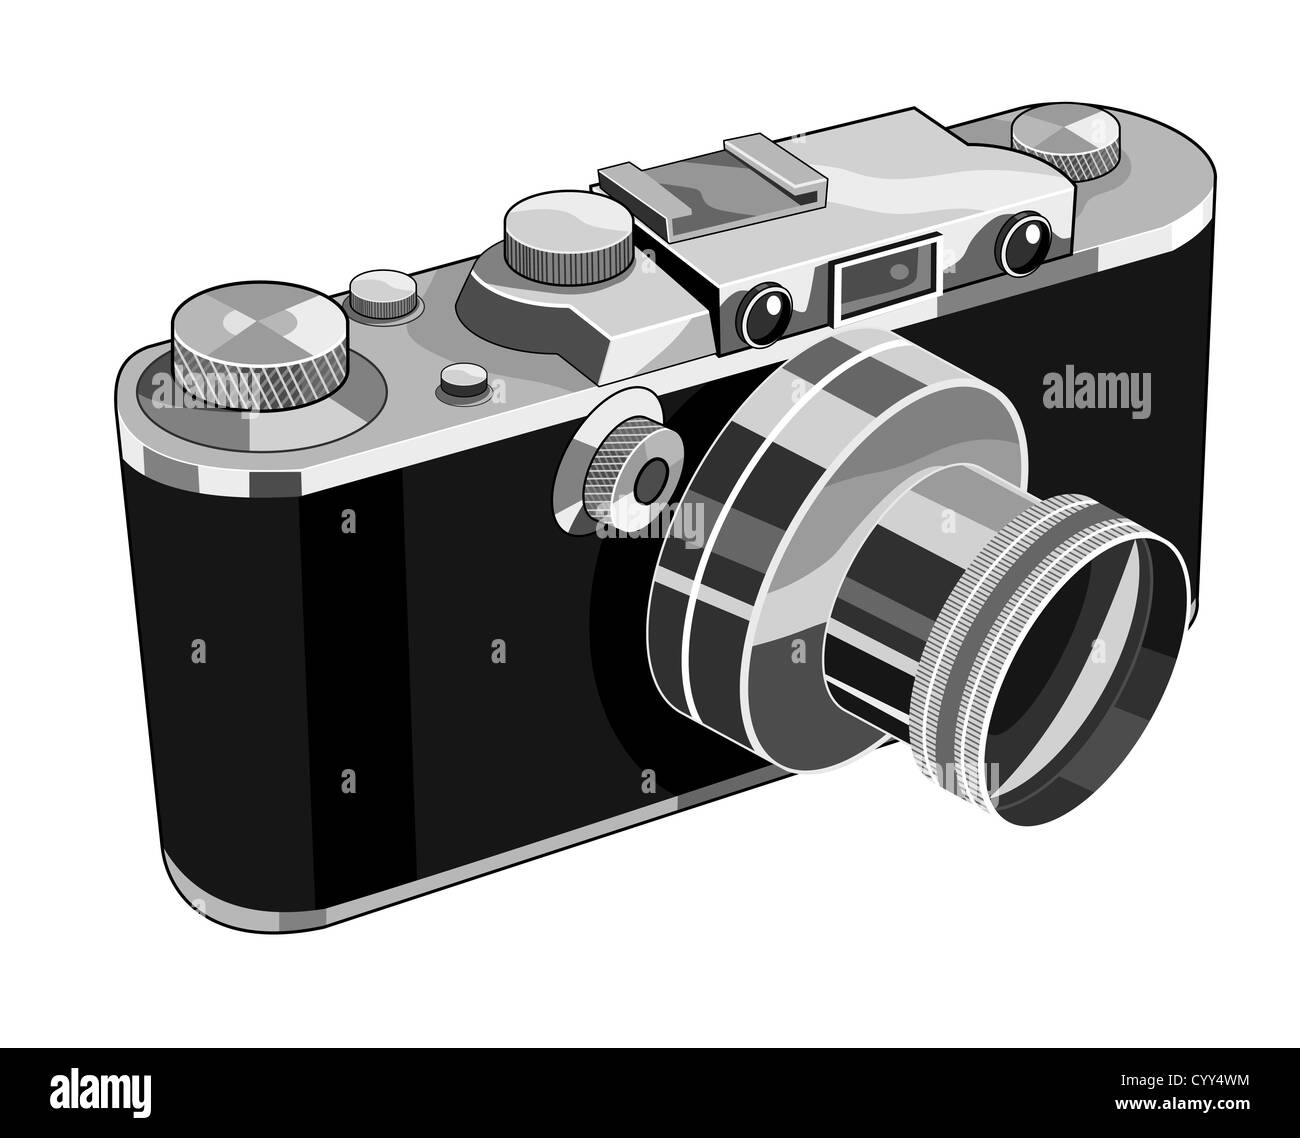 Illustration of a vintage camera done in retro style. Stock Photo